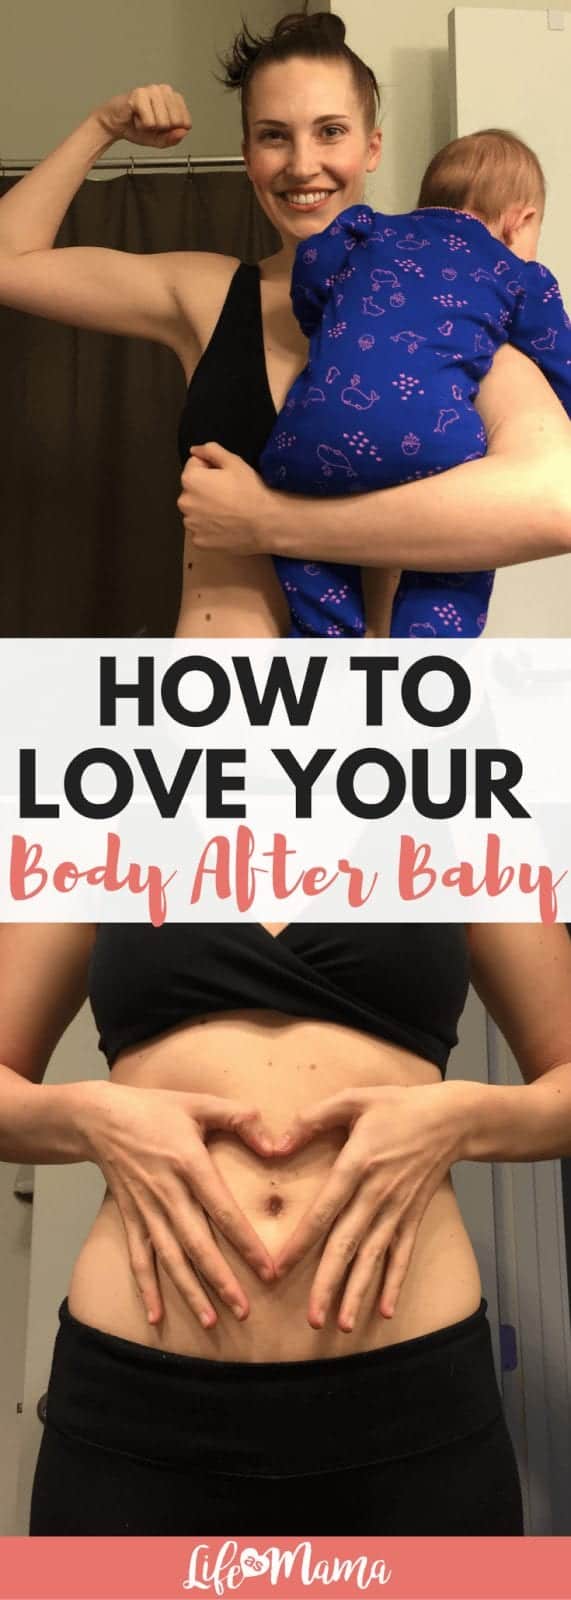 body after baby